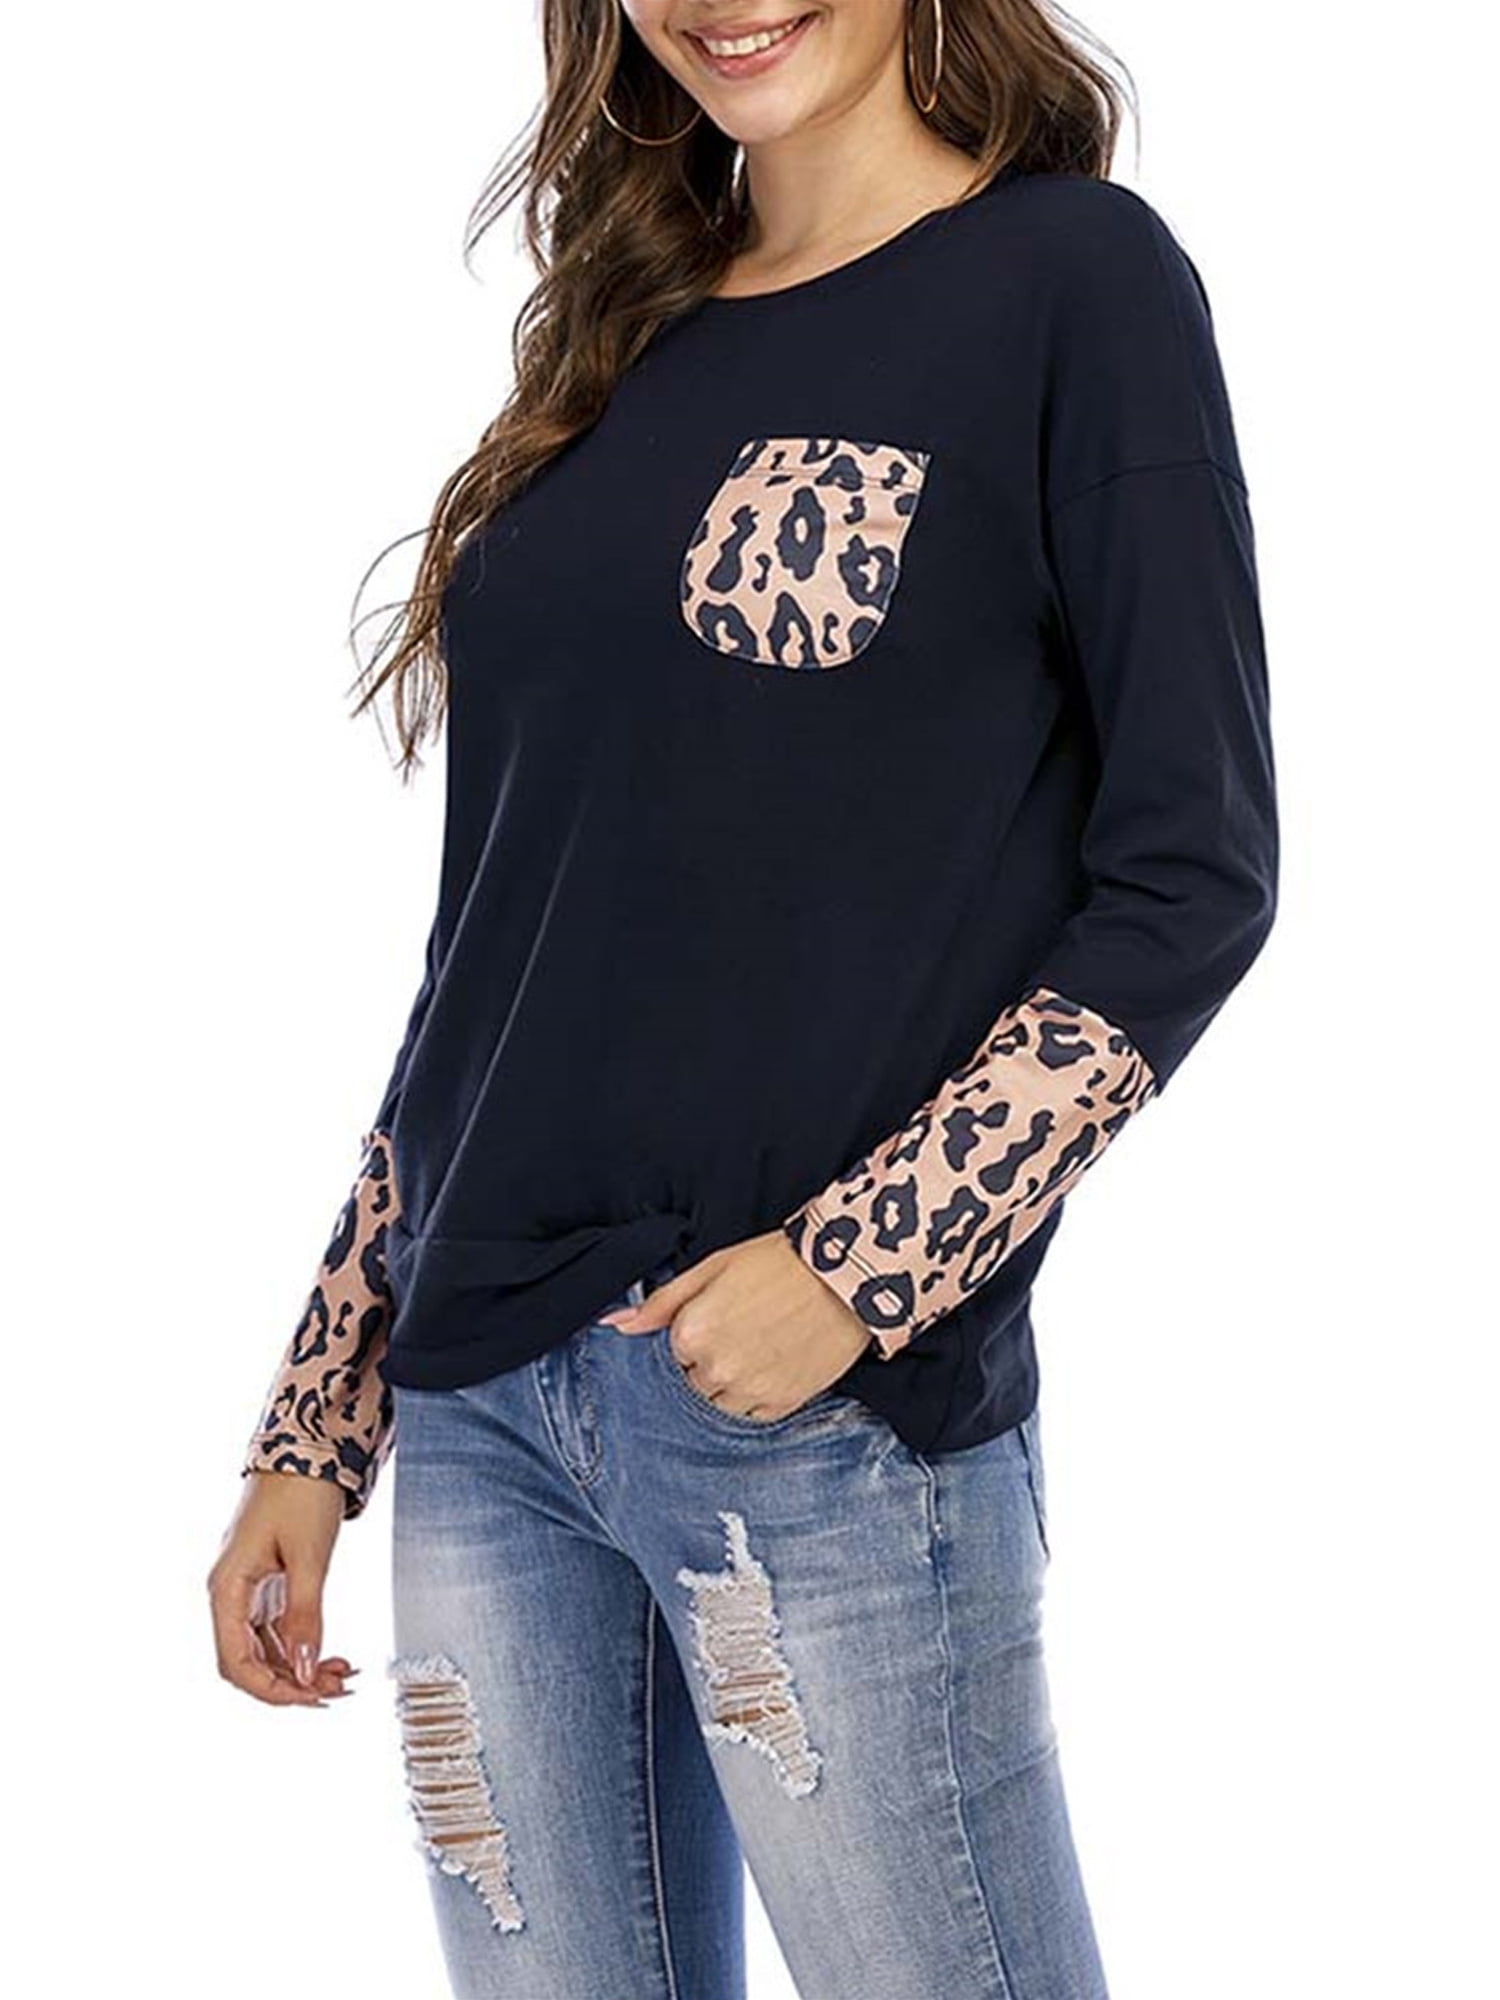 ZXjymll/~ Womens Casual Leopard Printing Long Sleeve Crew Neck Tops Blouse Shirt Tunic